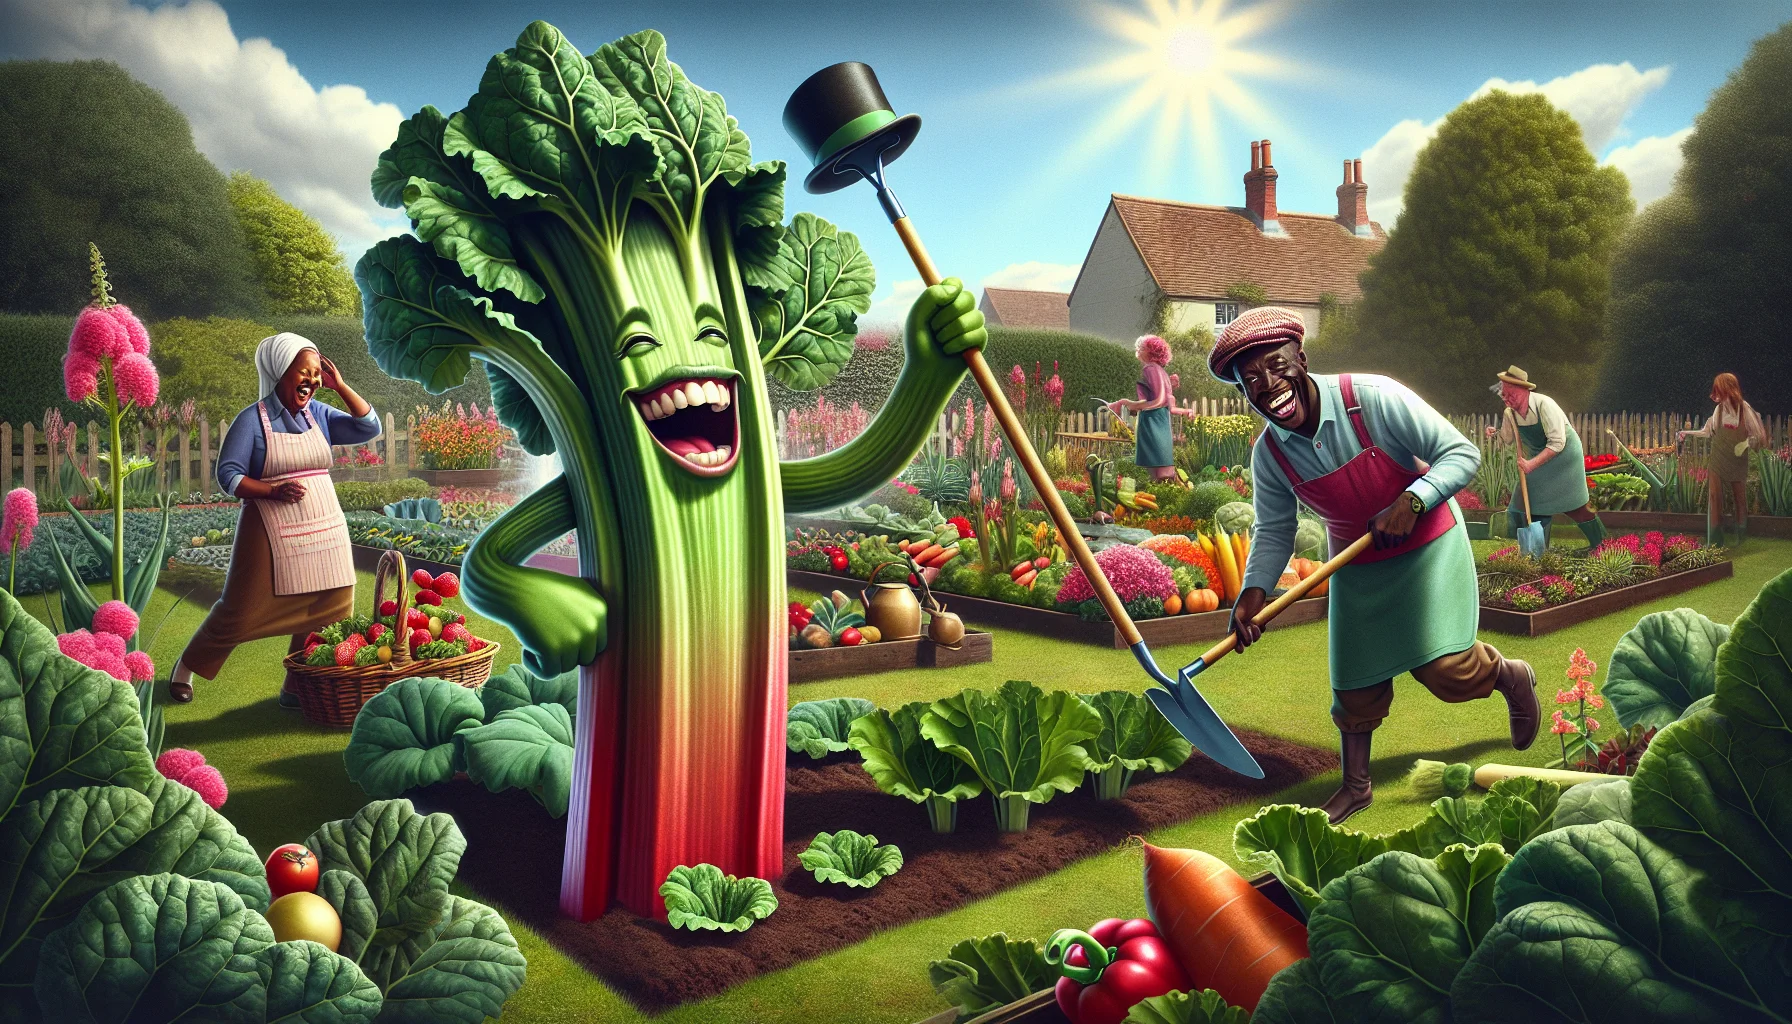 Create a realistic image illustrating a comical gardening scene involving rhubarb. Imagine a rhubarb anthropomorphized into a charming entertainer with a green-hued top hat, waving its leafy arms encouragingly. In the background, a picturesque garden filled with a riot of vegetables and flowers of different colors and shapes under a sunny sky. Thrown in are a couple of gardeners, one a Black female laughing heartily swinging a spade and the other a Middle-Eastern male chuckling as he waters the plants. This quirky scene communicates the joy of gardening.